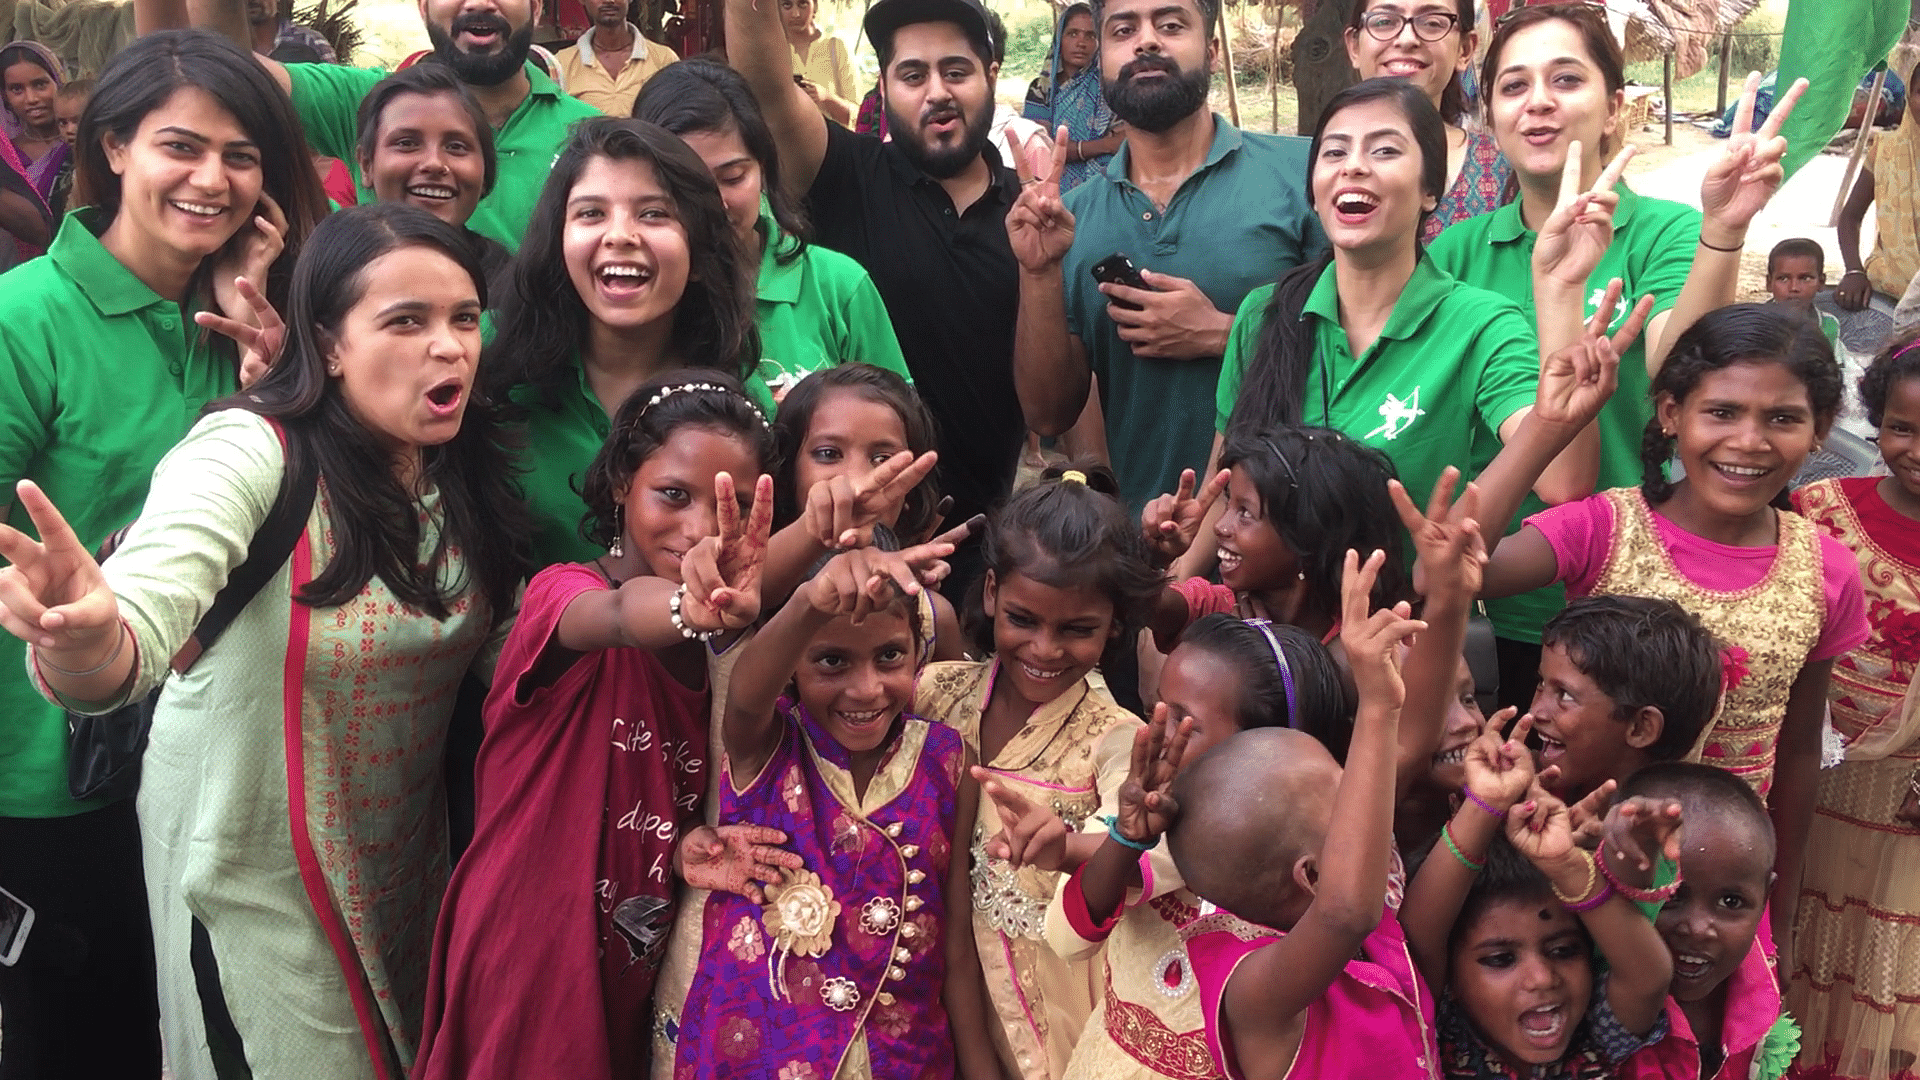 

As part of the mission, around 50 volunteers of the Robin Hood Army travelled to different areas of Delhi on 15 August, seeking nothing but smiles.